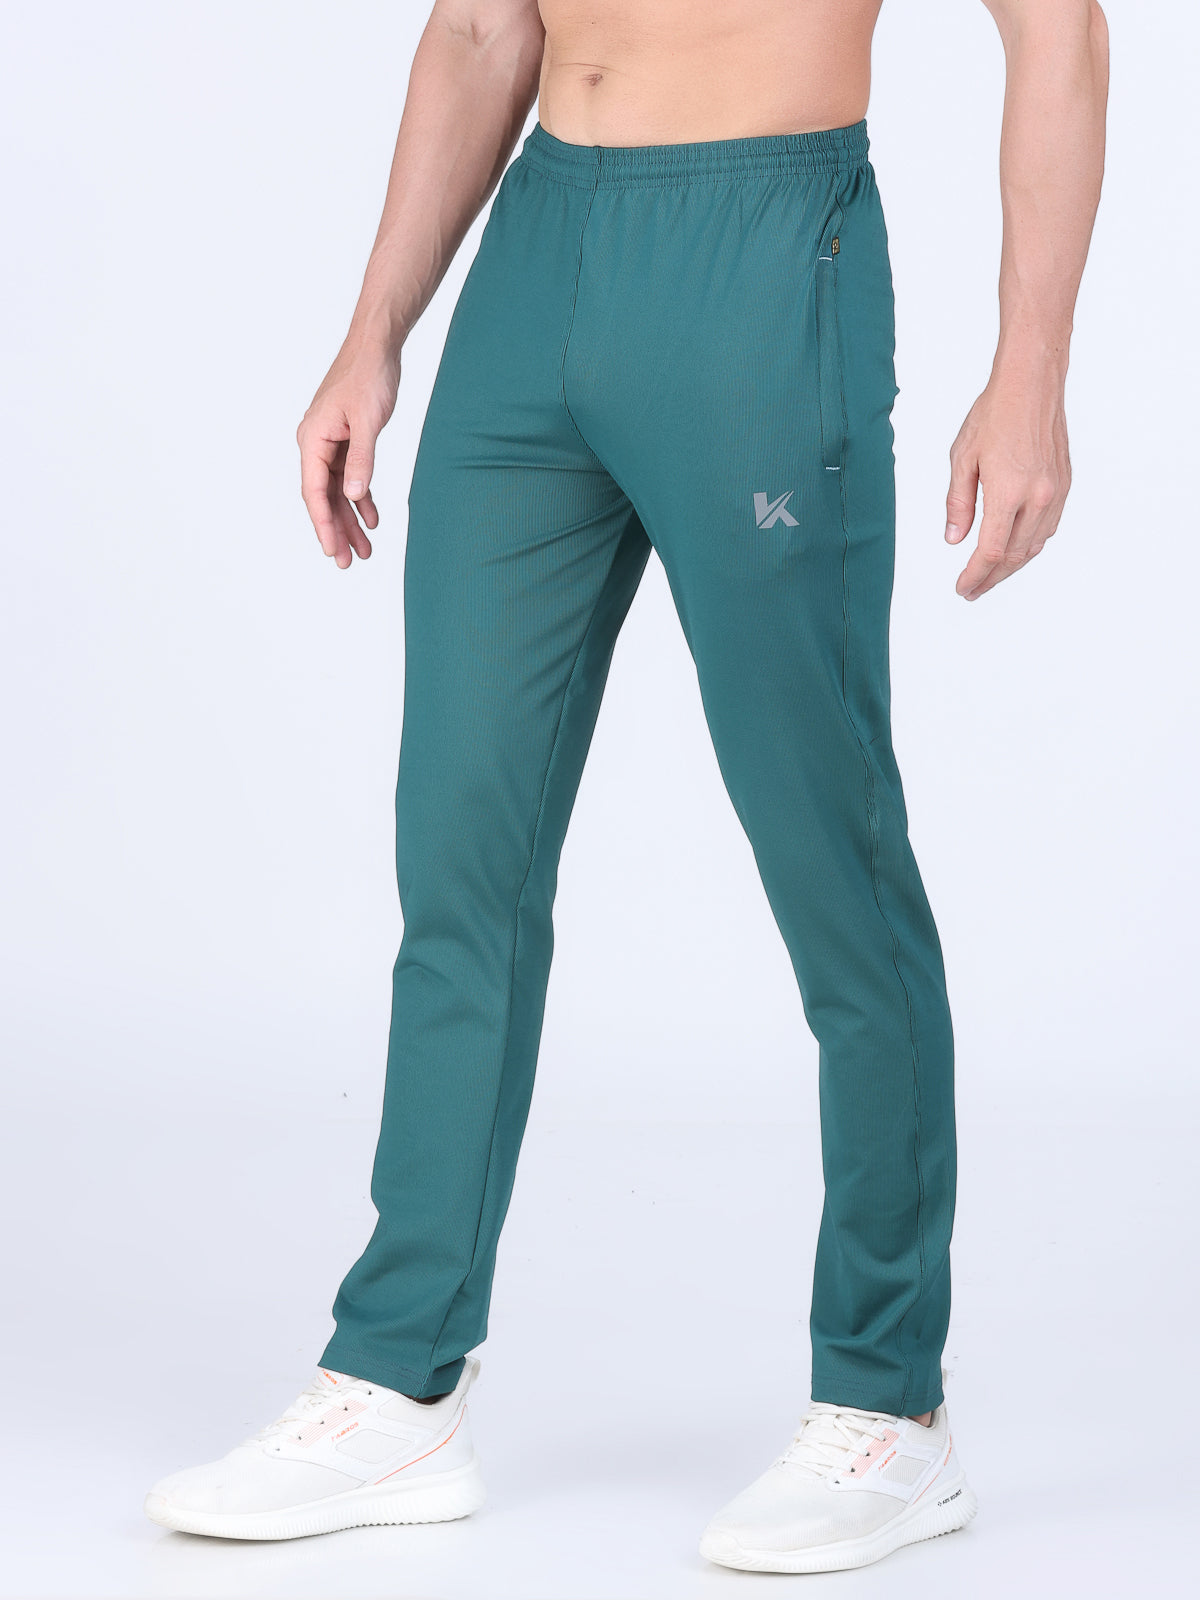 Combo of 2 Men's 4 Way Stretch Lining Bottle Green and Silver Track Pant